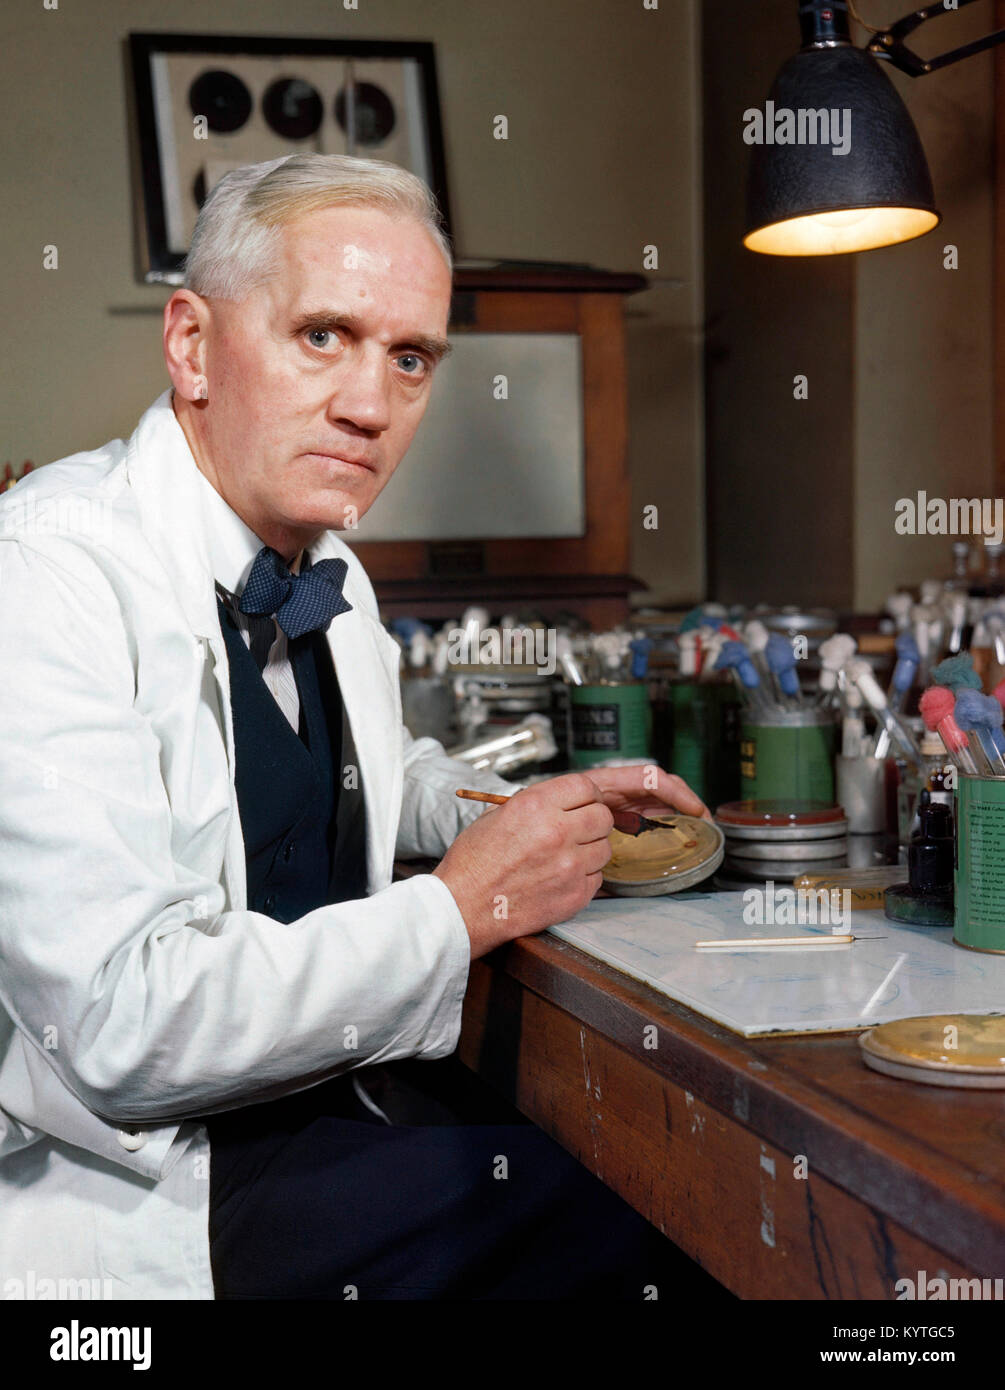 Sir Alexander Fleming (1881-1955), the Scottish scientist famous for the discovery of penicillin. Photo taken between 1939 and 1945. Stock Photo